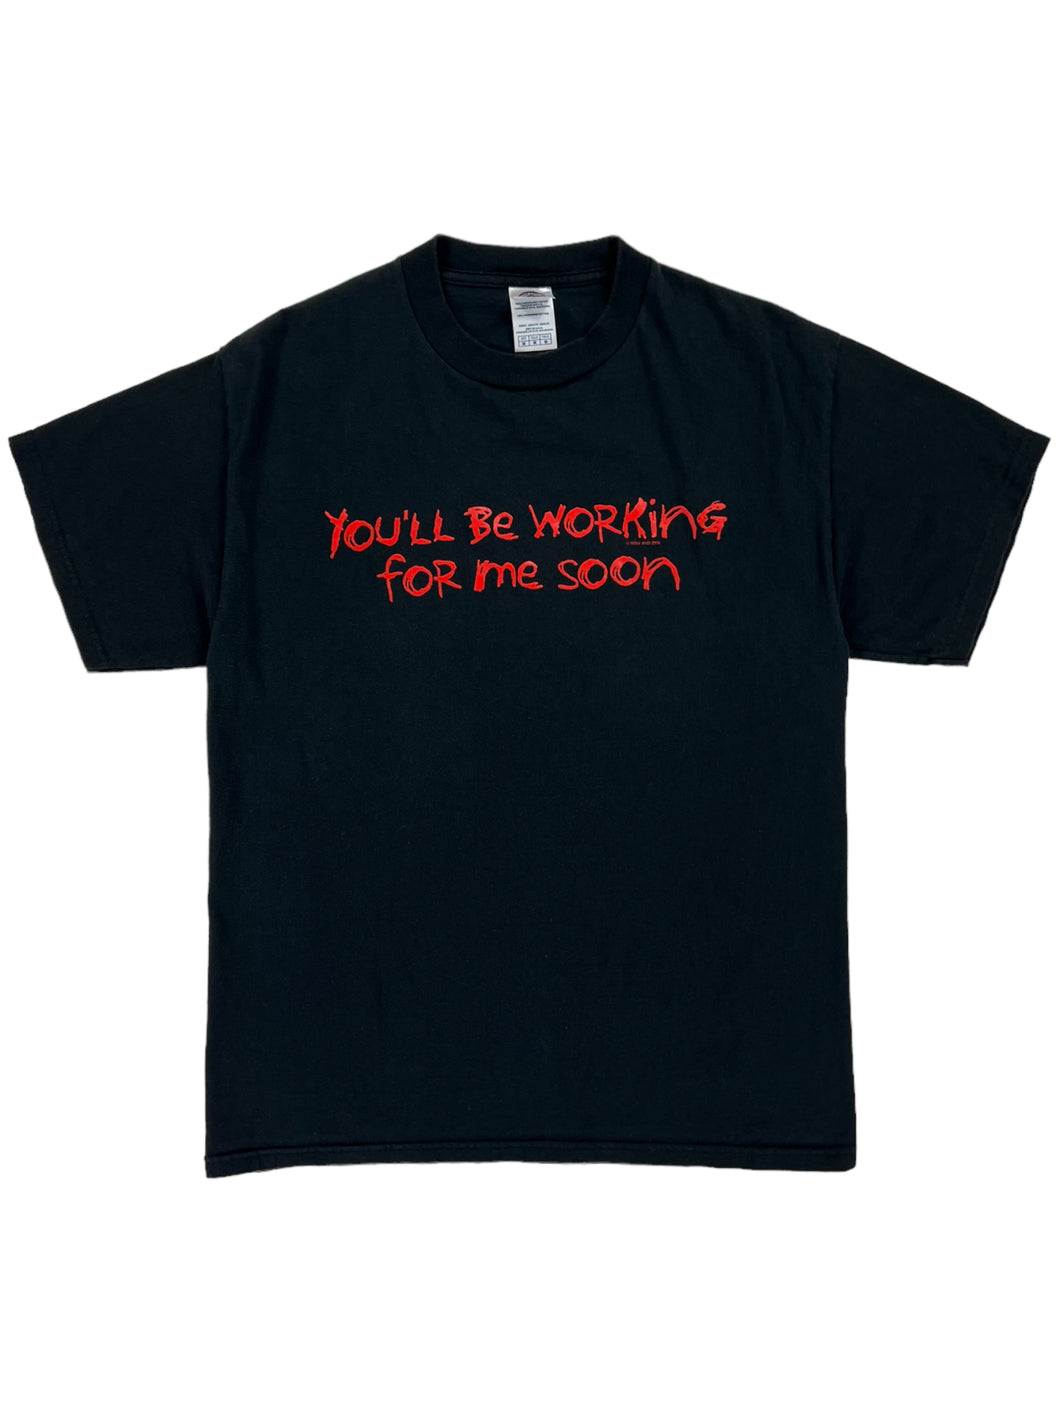 Vintage 2000s Now and Zen “ You’ll be working for me soon “ text tee (M)